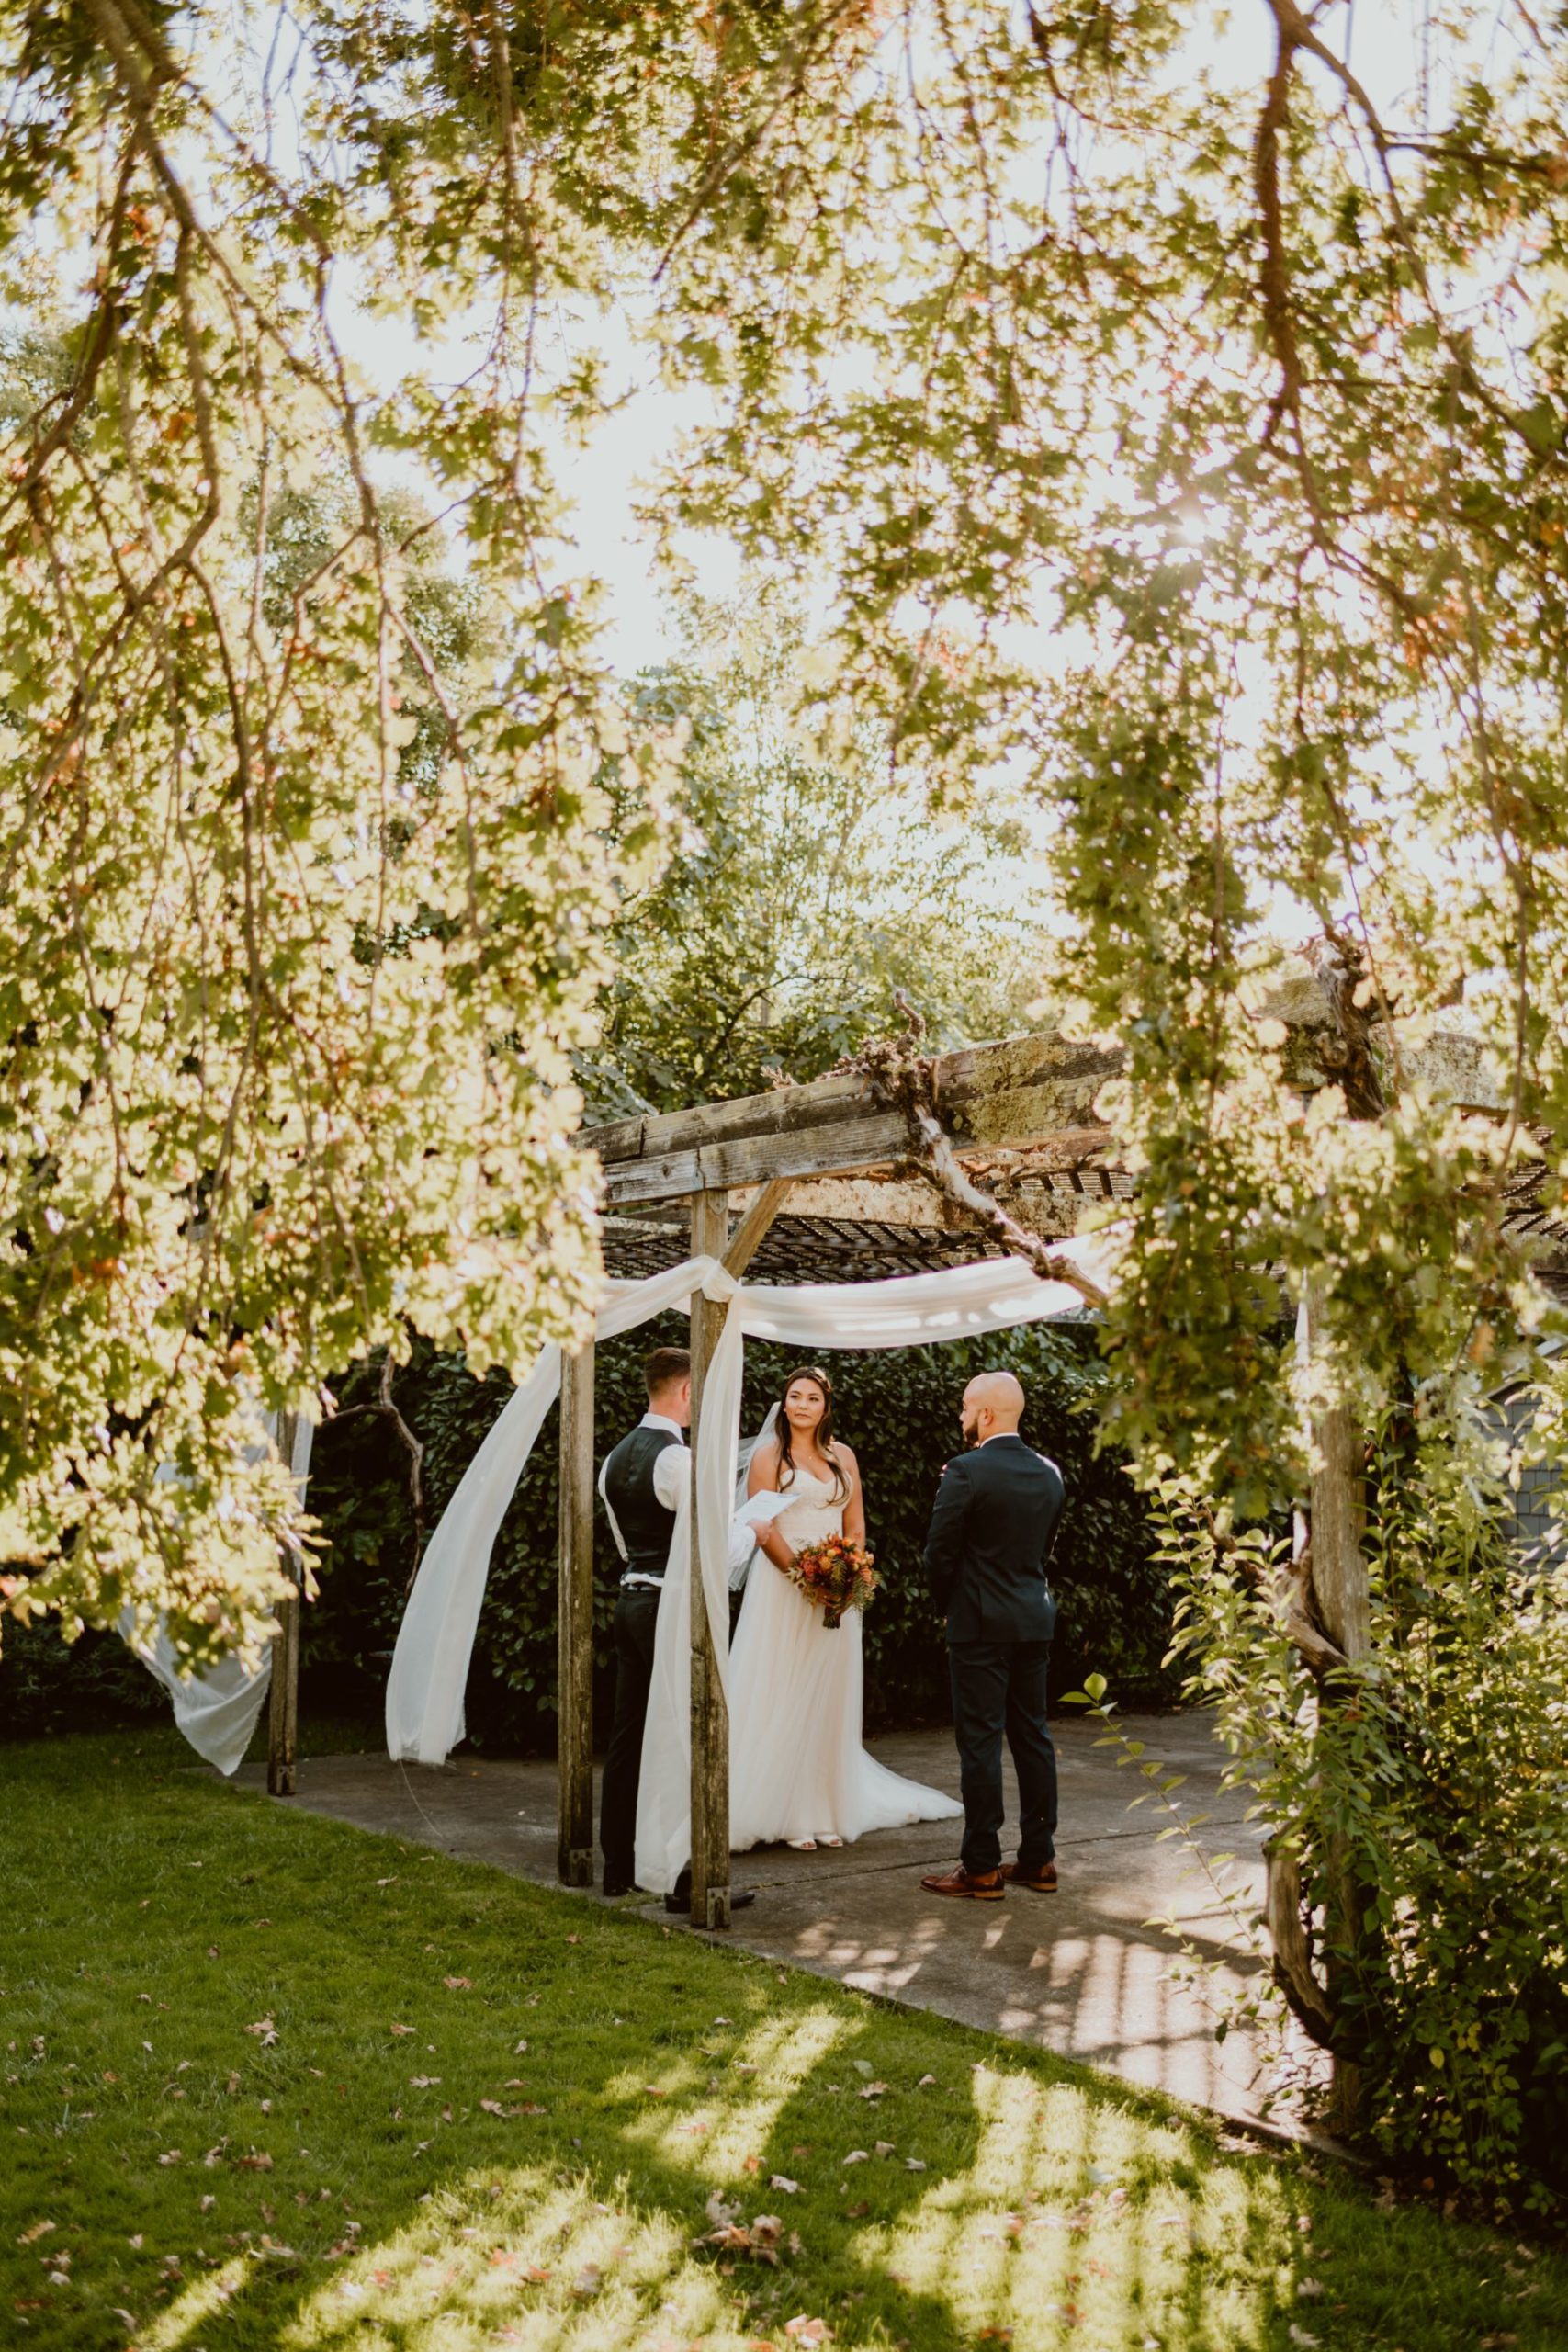 A bride and groom face each other during their elopement ceremony under a pergola and oak tree, with sunlight filtering through.

If you're currently grappling with making a Plan B or even Plan C because of covid, this backyard elopement in wine country will help give you some inspo!